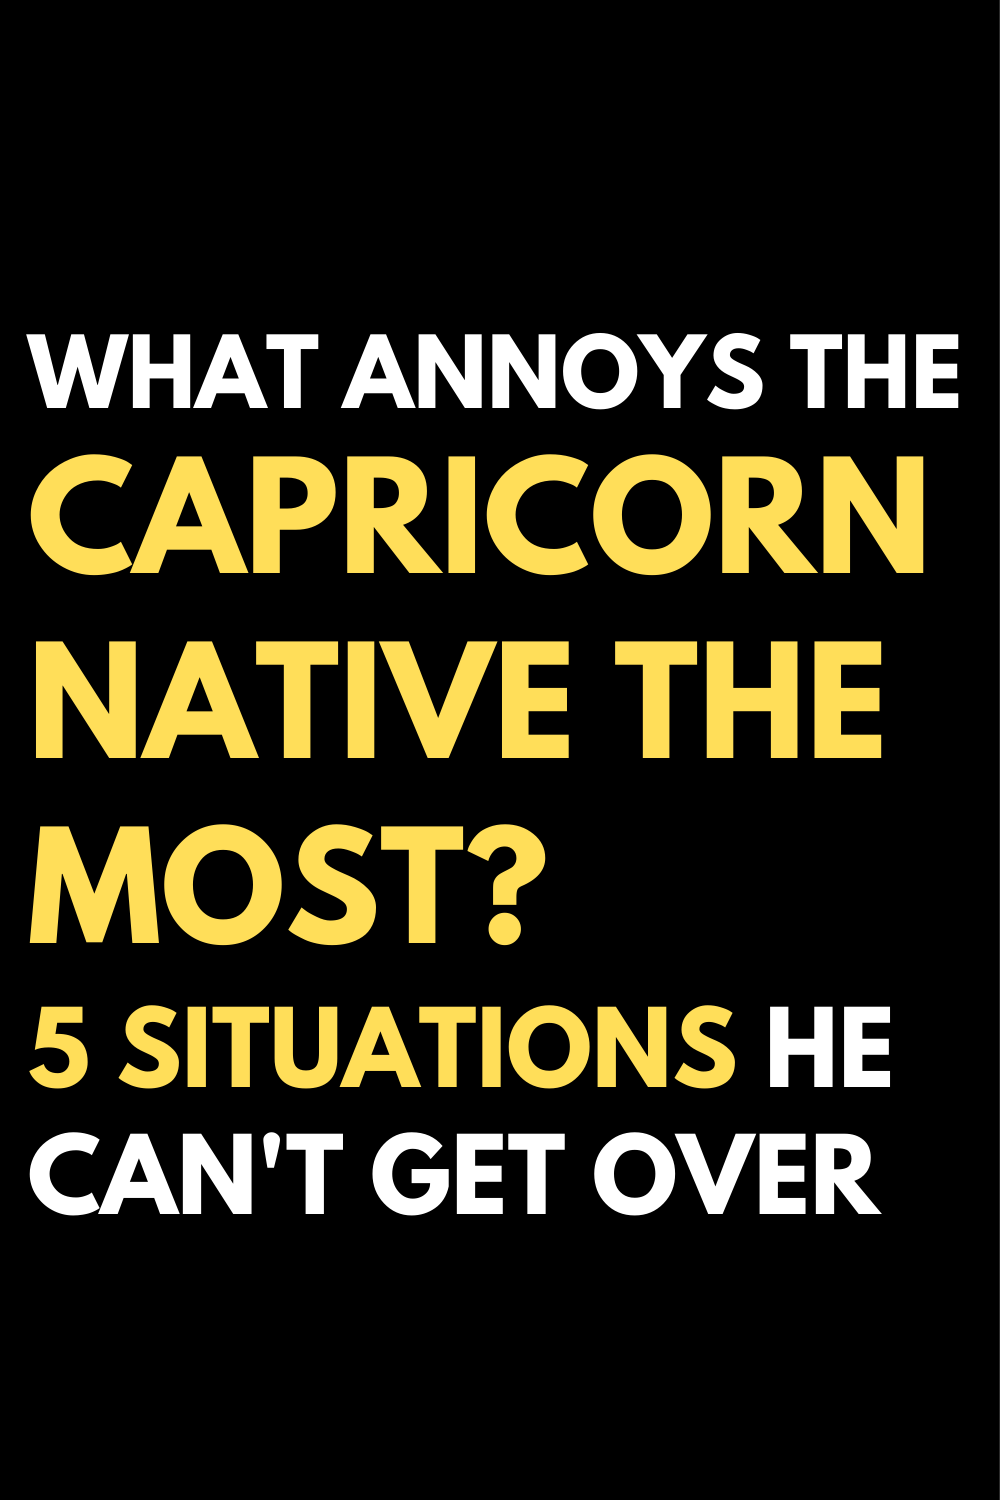 What annoys the Capricorn native the most? 5 situations he can't get over